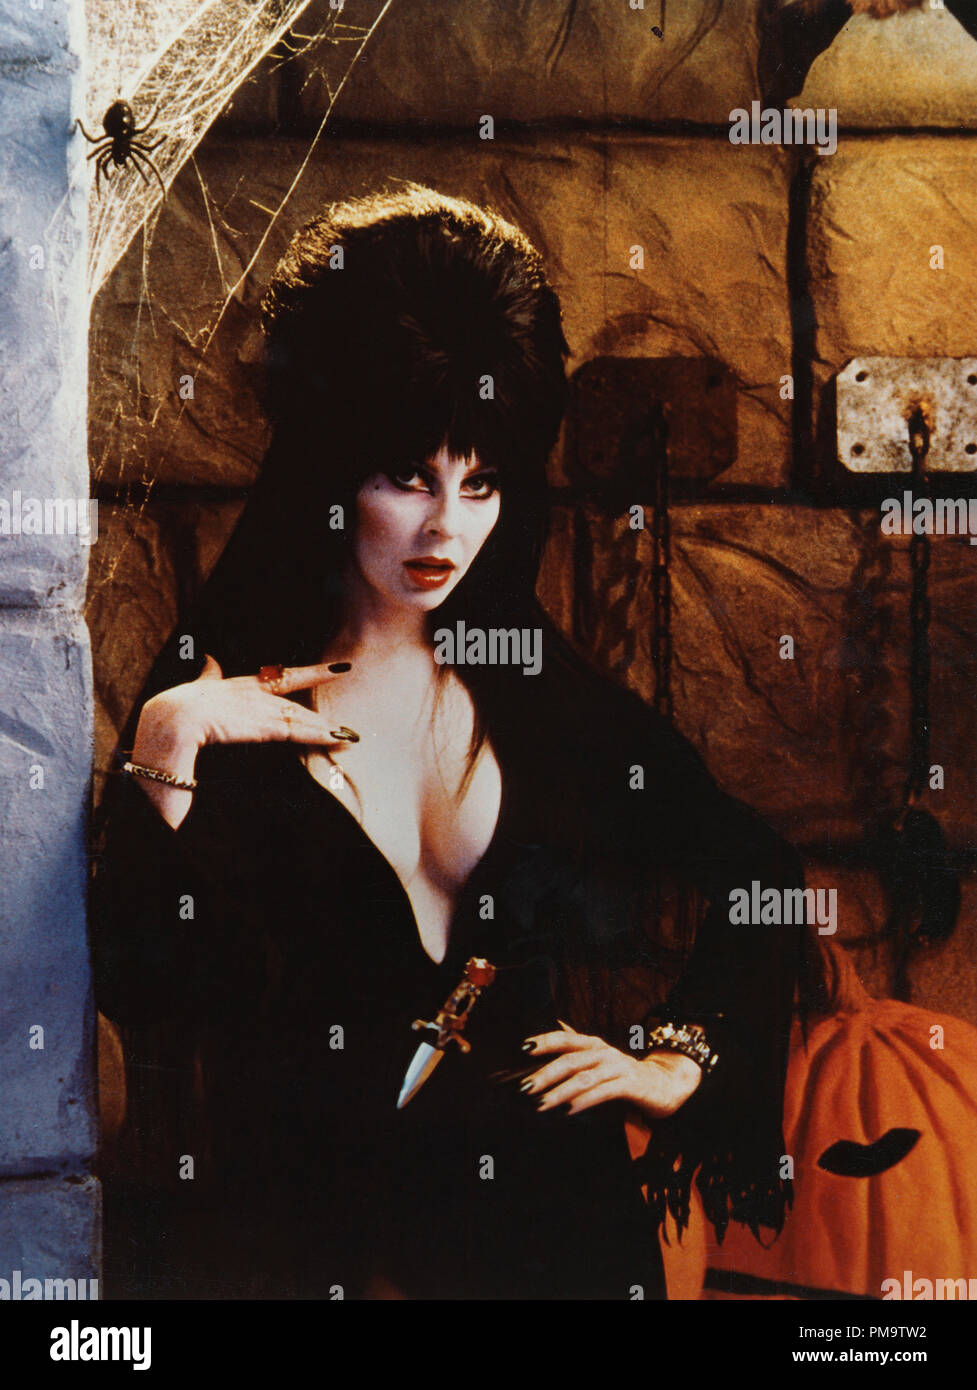 Studio Publicity Still from Cassandra Peterson (Elvira) circa 1987  All Rights Reserved   File Reference # 31697002THA  For Editorial Use Only Stock Photo